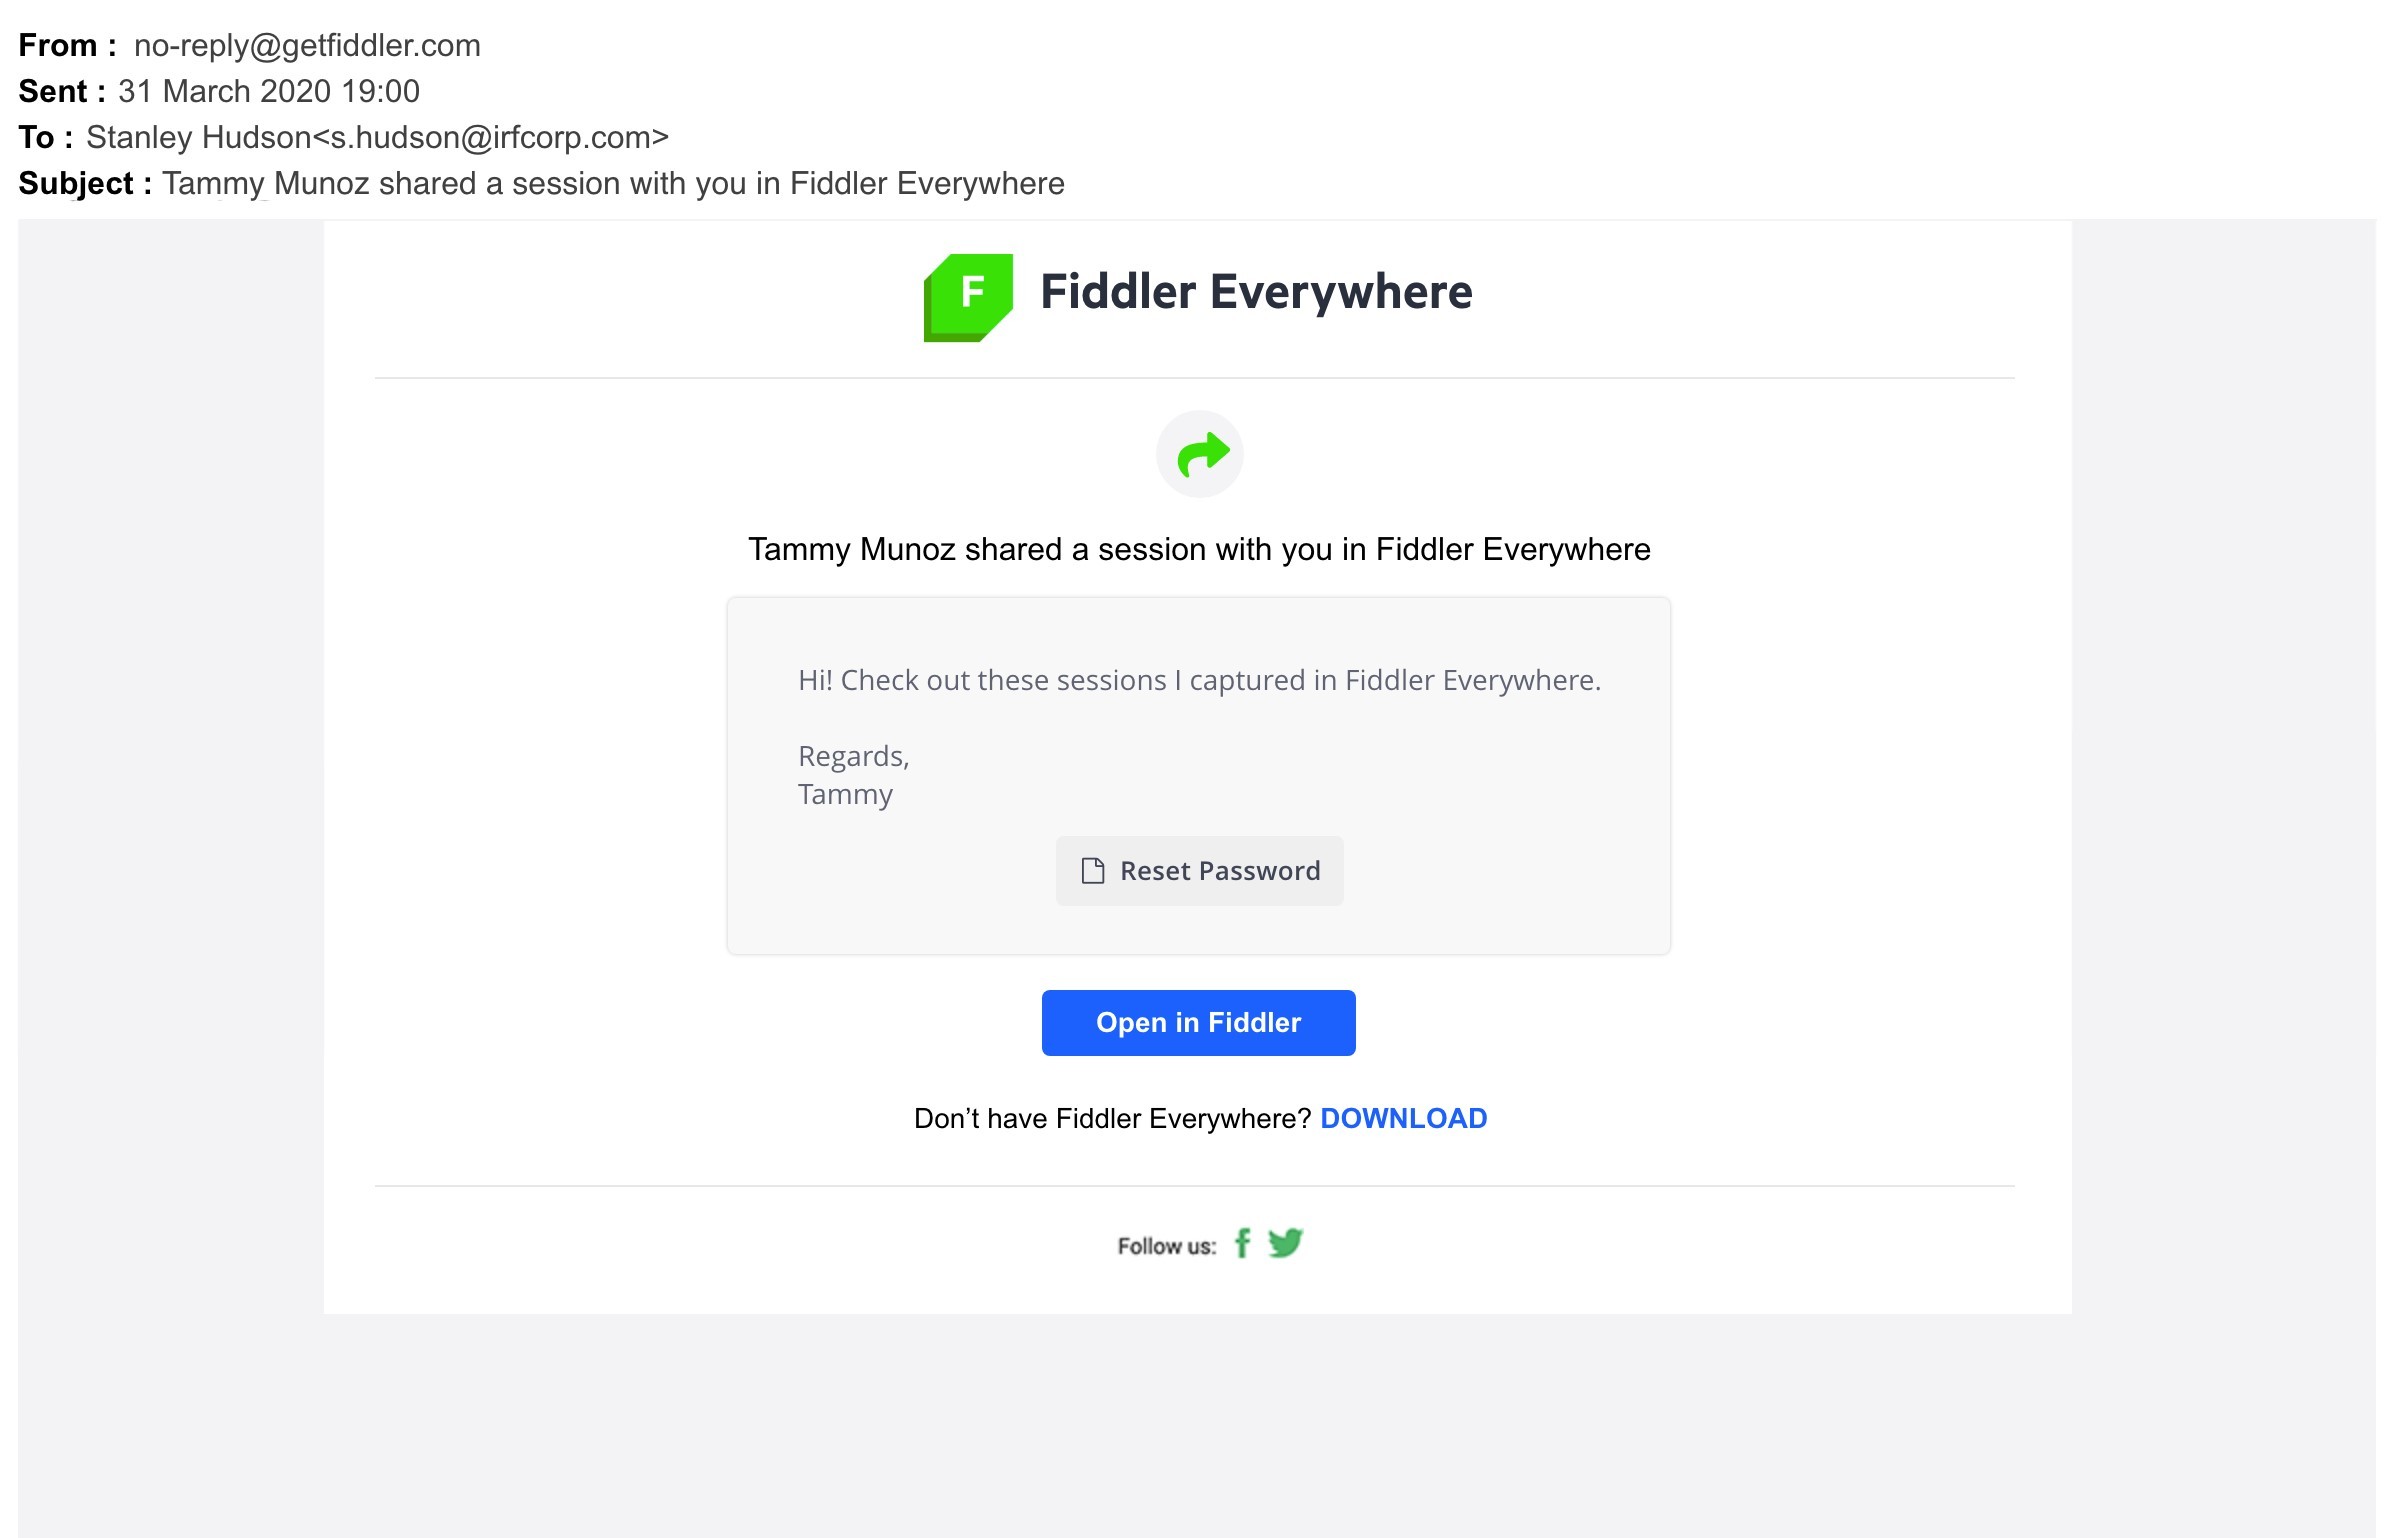 Fiddler Everywhere Share Sessions 3